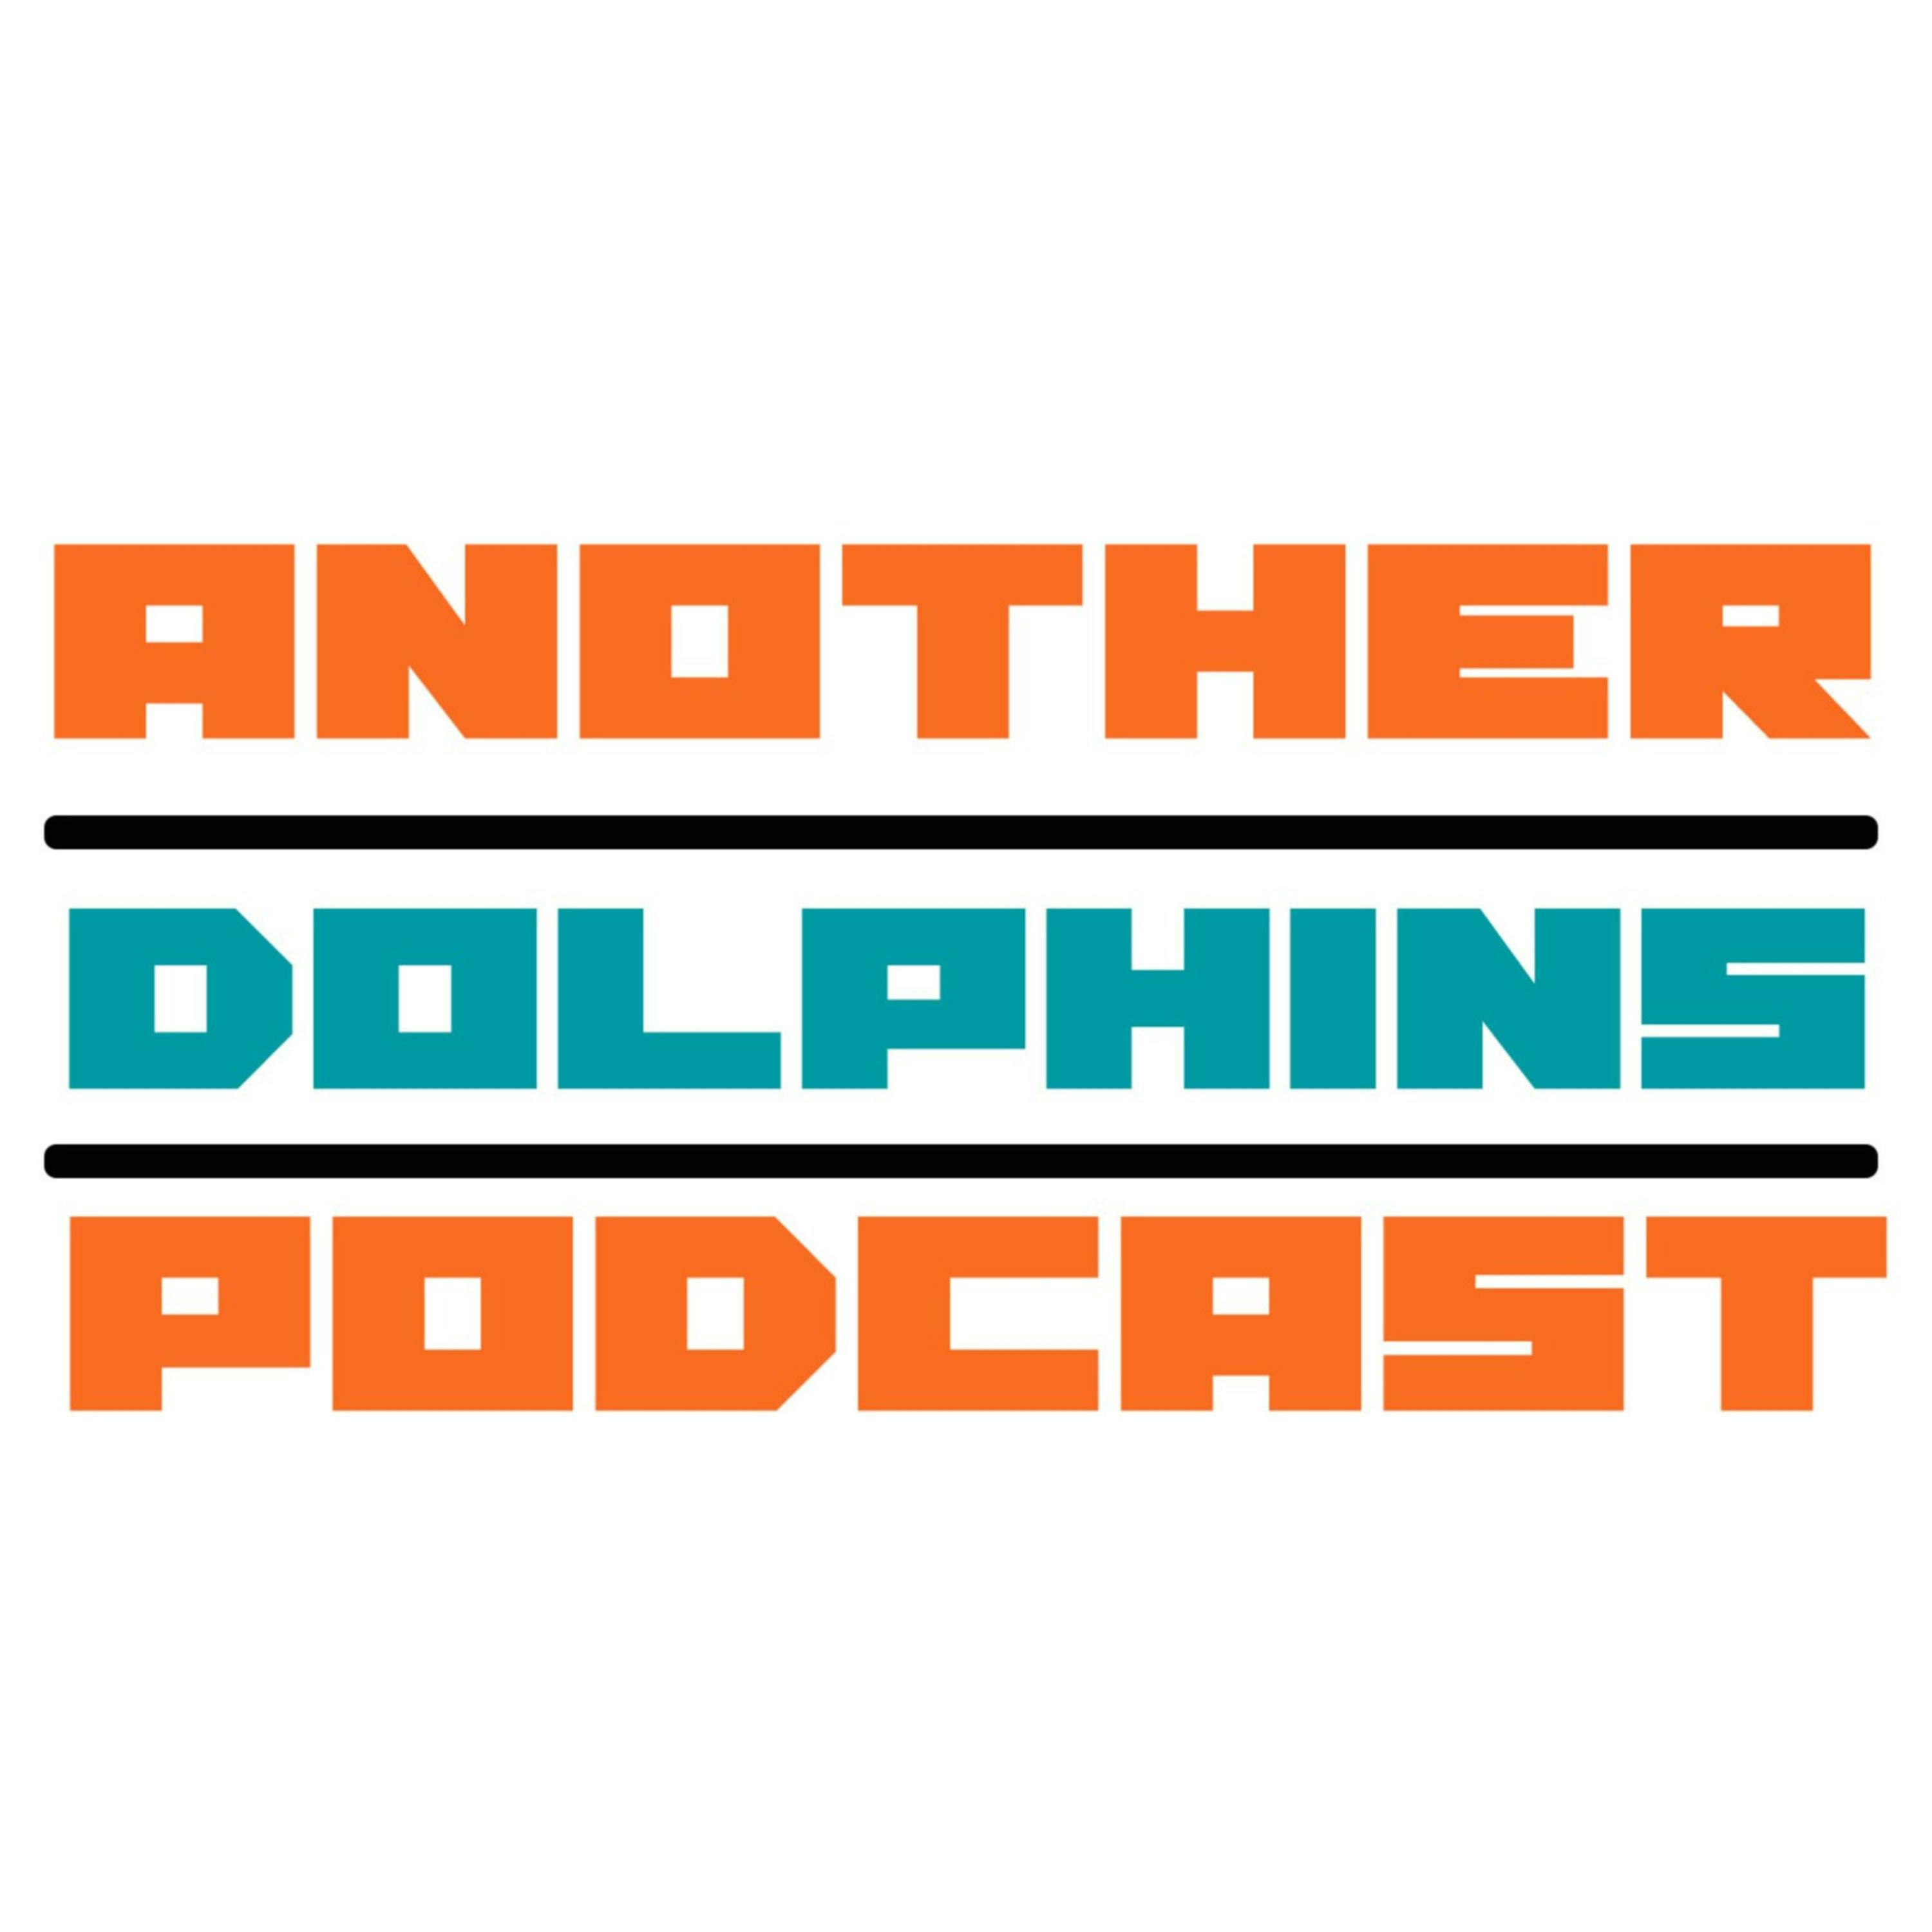 Miami Dolphins Podcast (Phinsider Radio): What QB will the Miami Dolphins select in the 2020 NFL Draft?